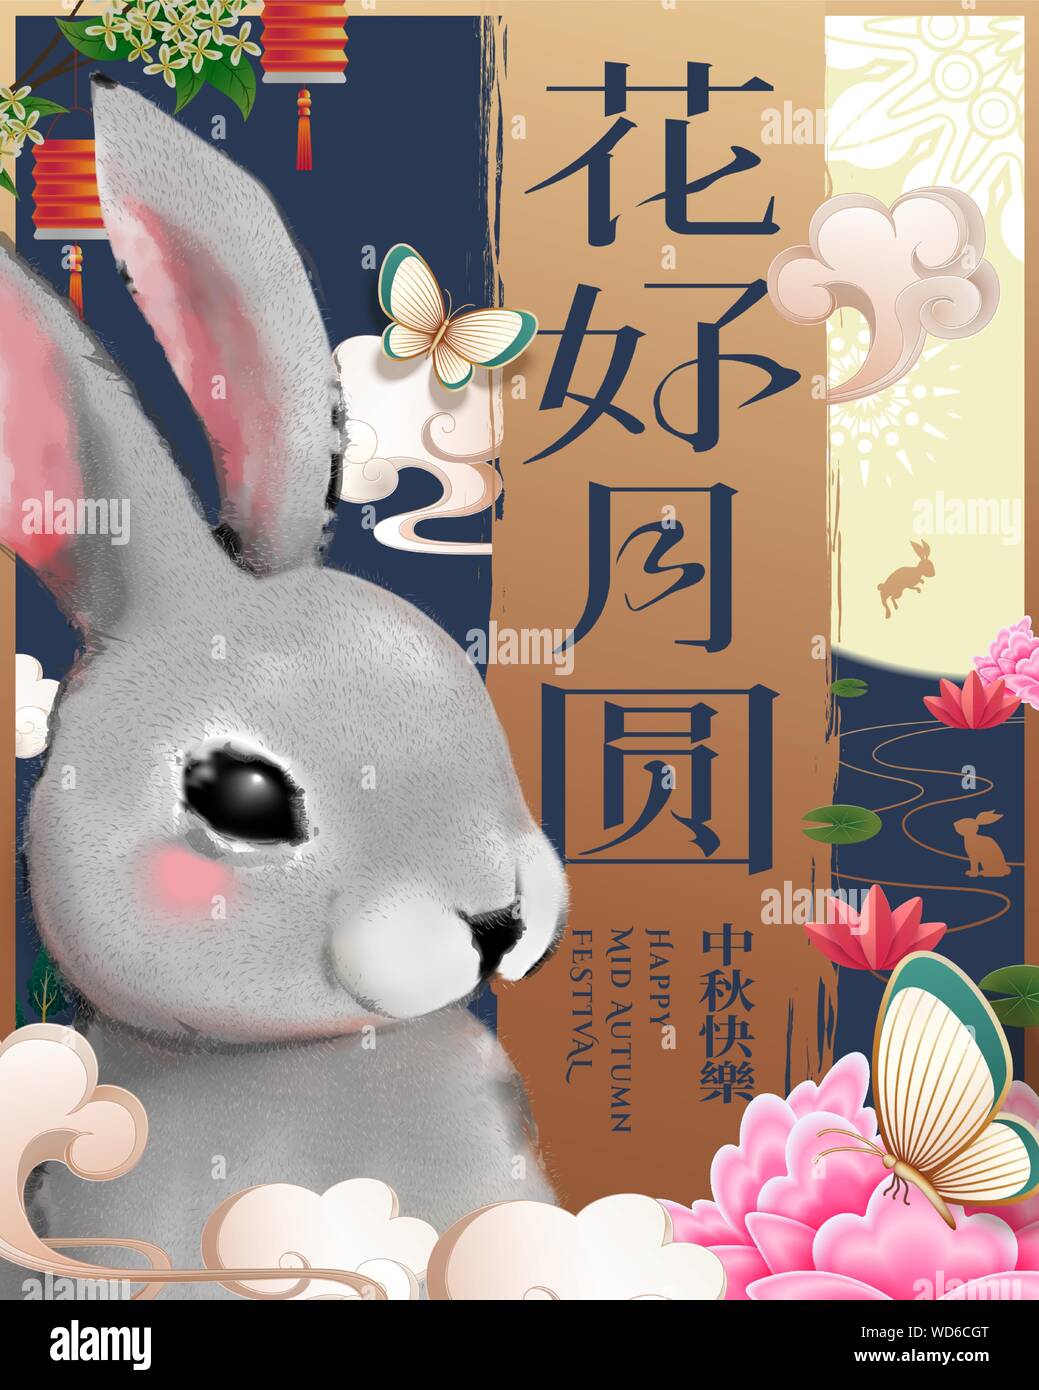 Happy mid autumn festival poster with giant grey fluffy rabbit on blue background, Holiday name written in Chinese words Stock Vector